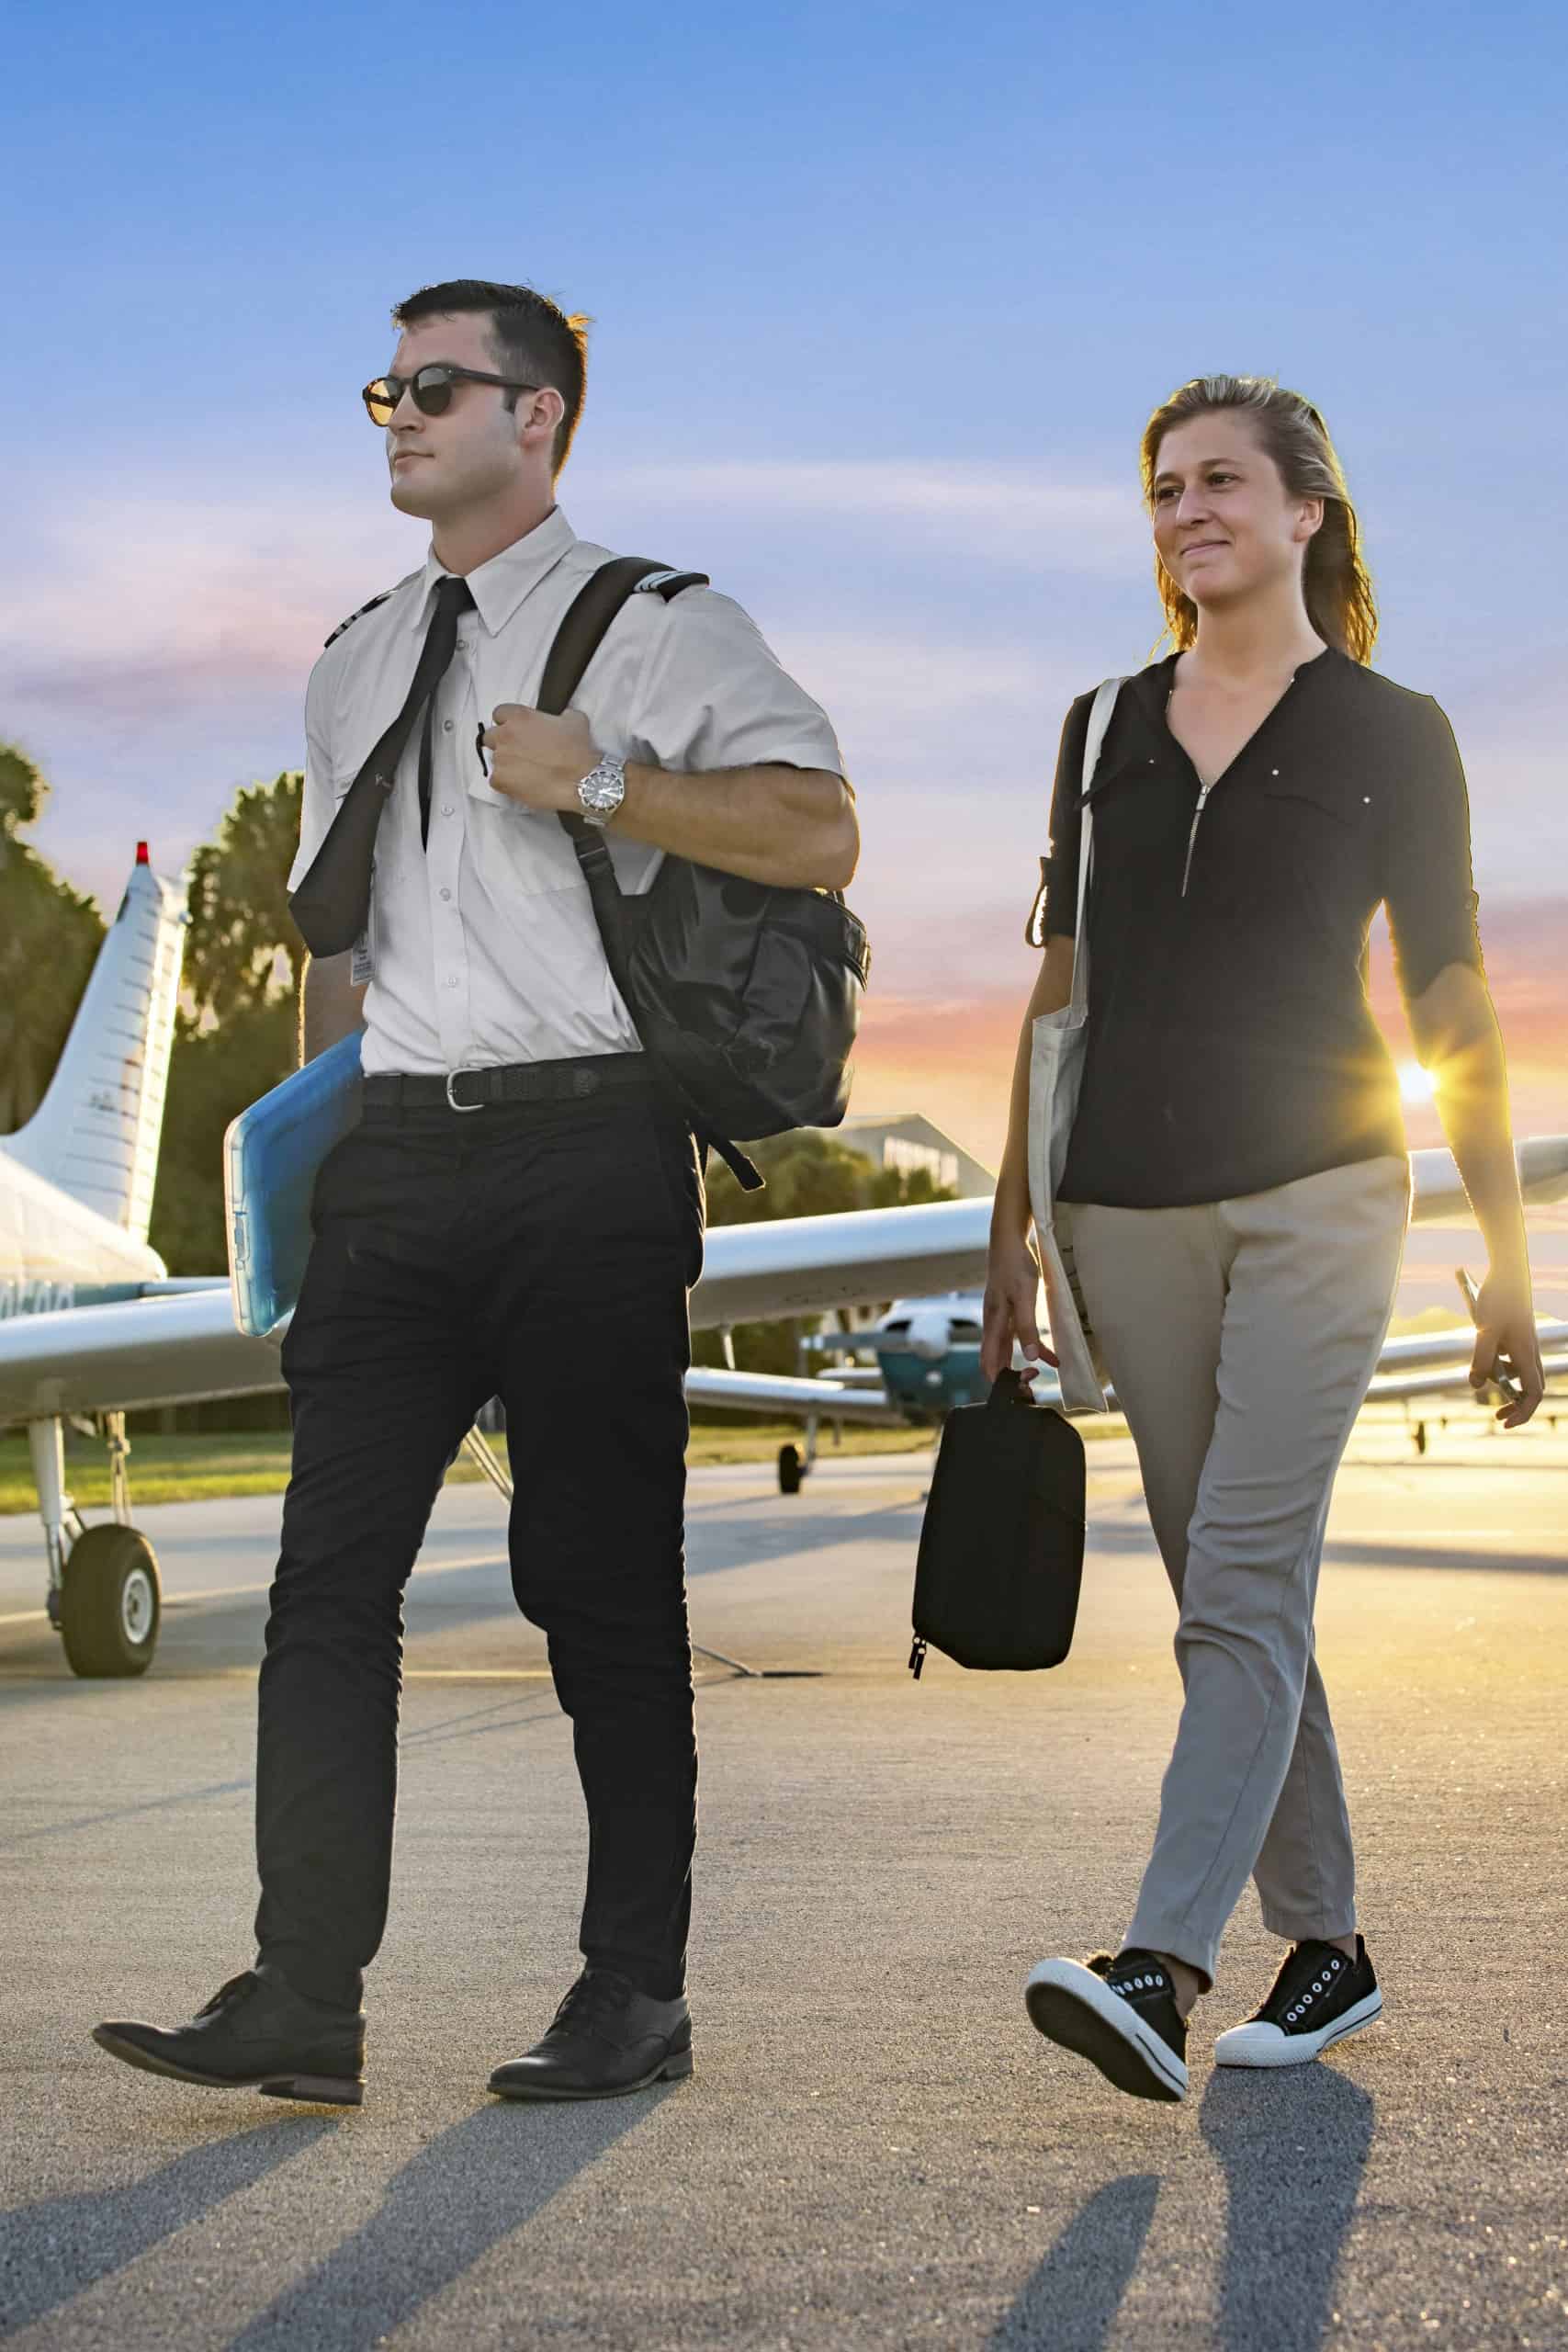 A pilot and passenger walking on the tarmac near small airplanes